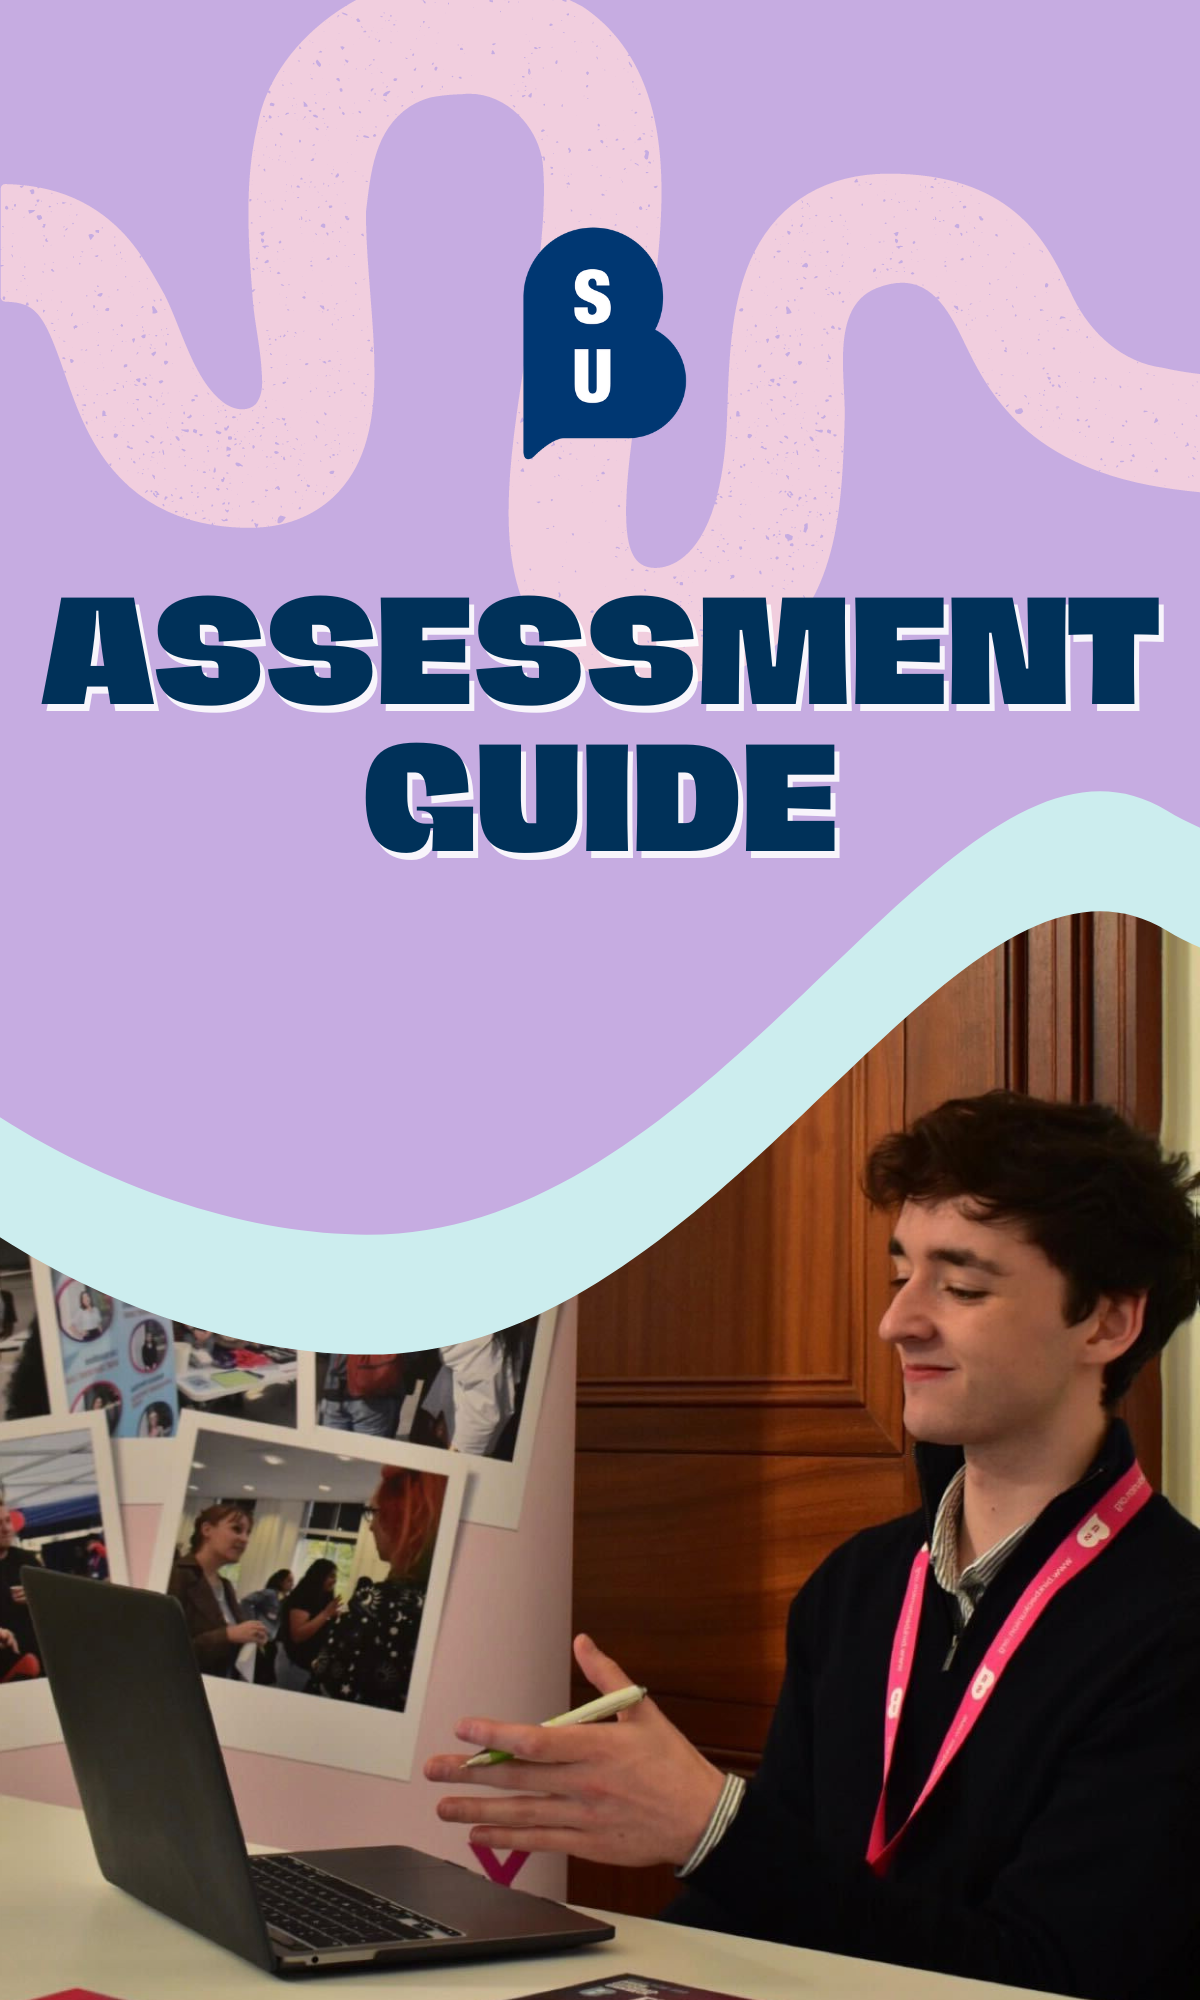 Image with a purple background and text saying Assessment guide, with an overlay of a photo fo a student with a laptop